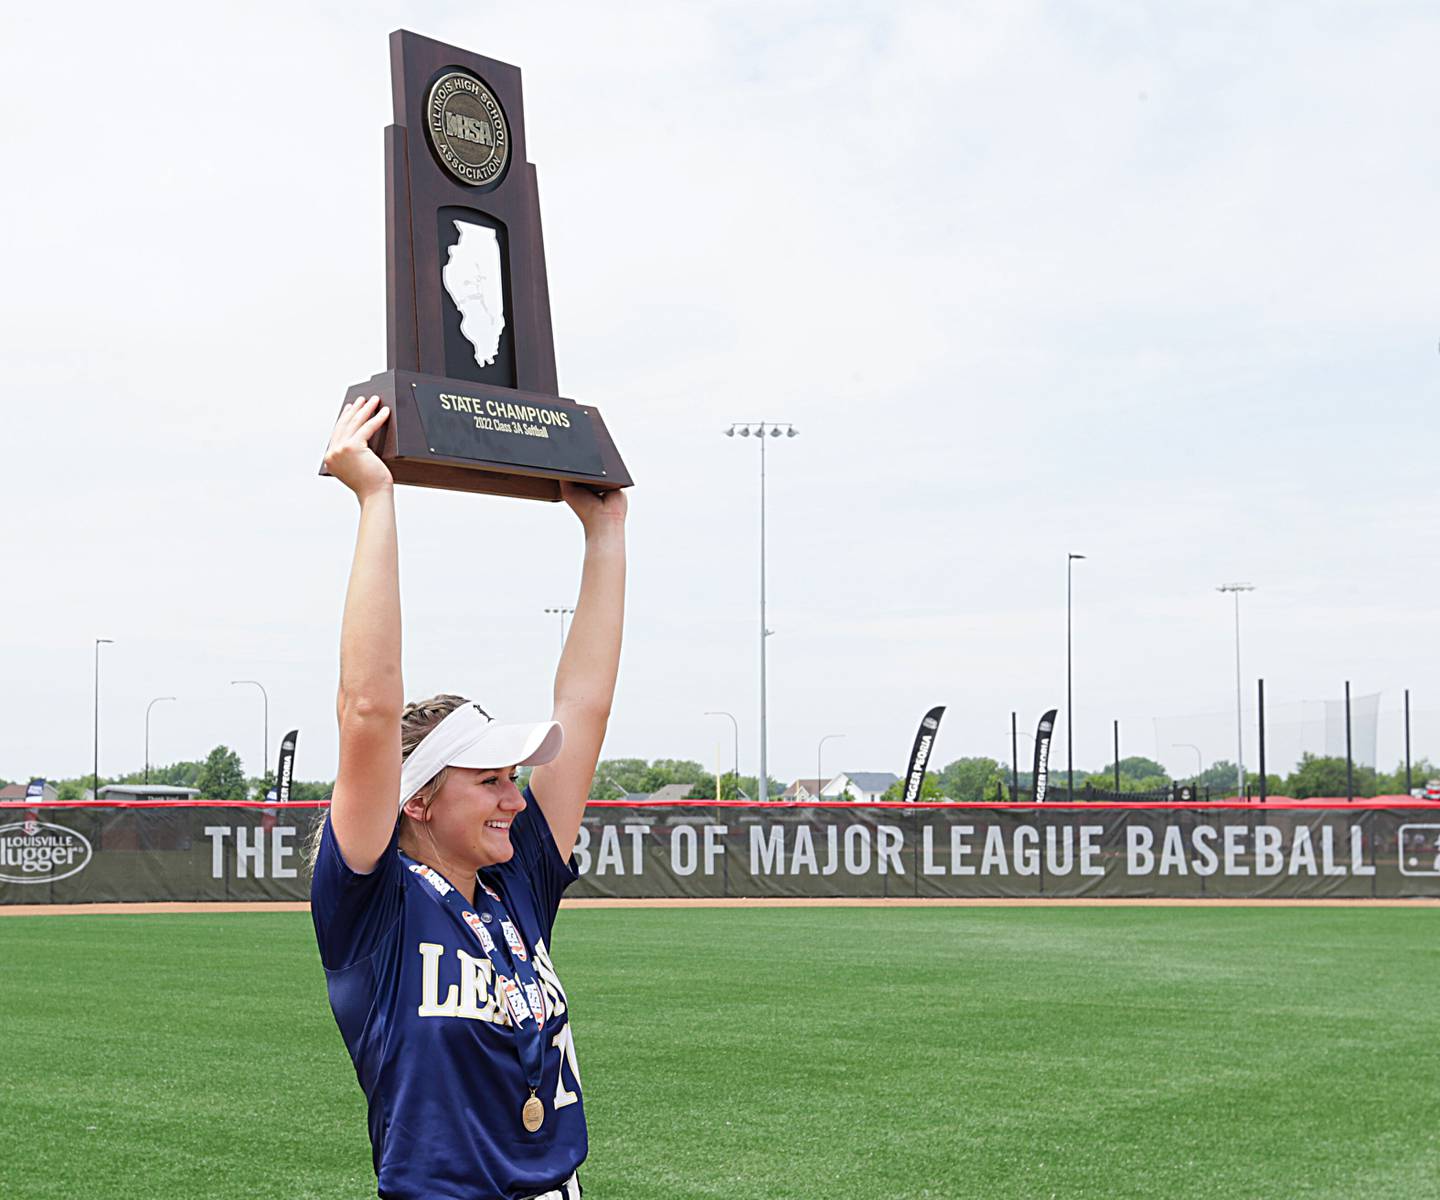 Lemont pitcher Sage Mardjetko hoists the Class 3A trophy in the air after winning the State Championship on Saturday, June 11, 2022 at Louisville Slugger Sports Complex in Peoria. Mardjetko pitched a no-hitter against St. Ignatius College Prep to win the state championship.